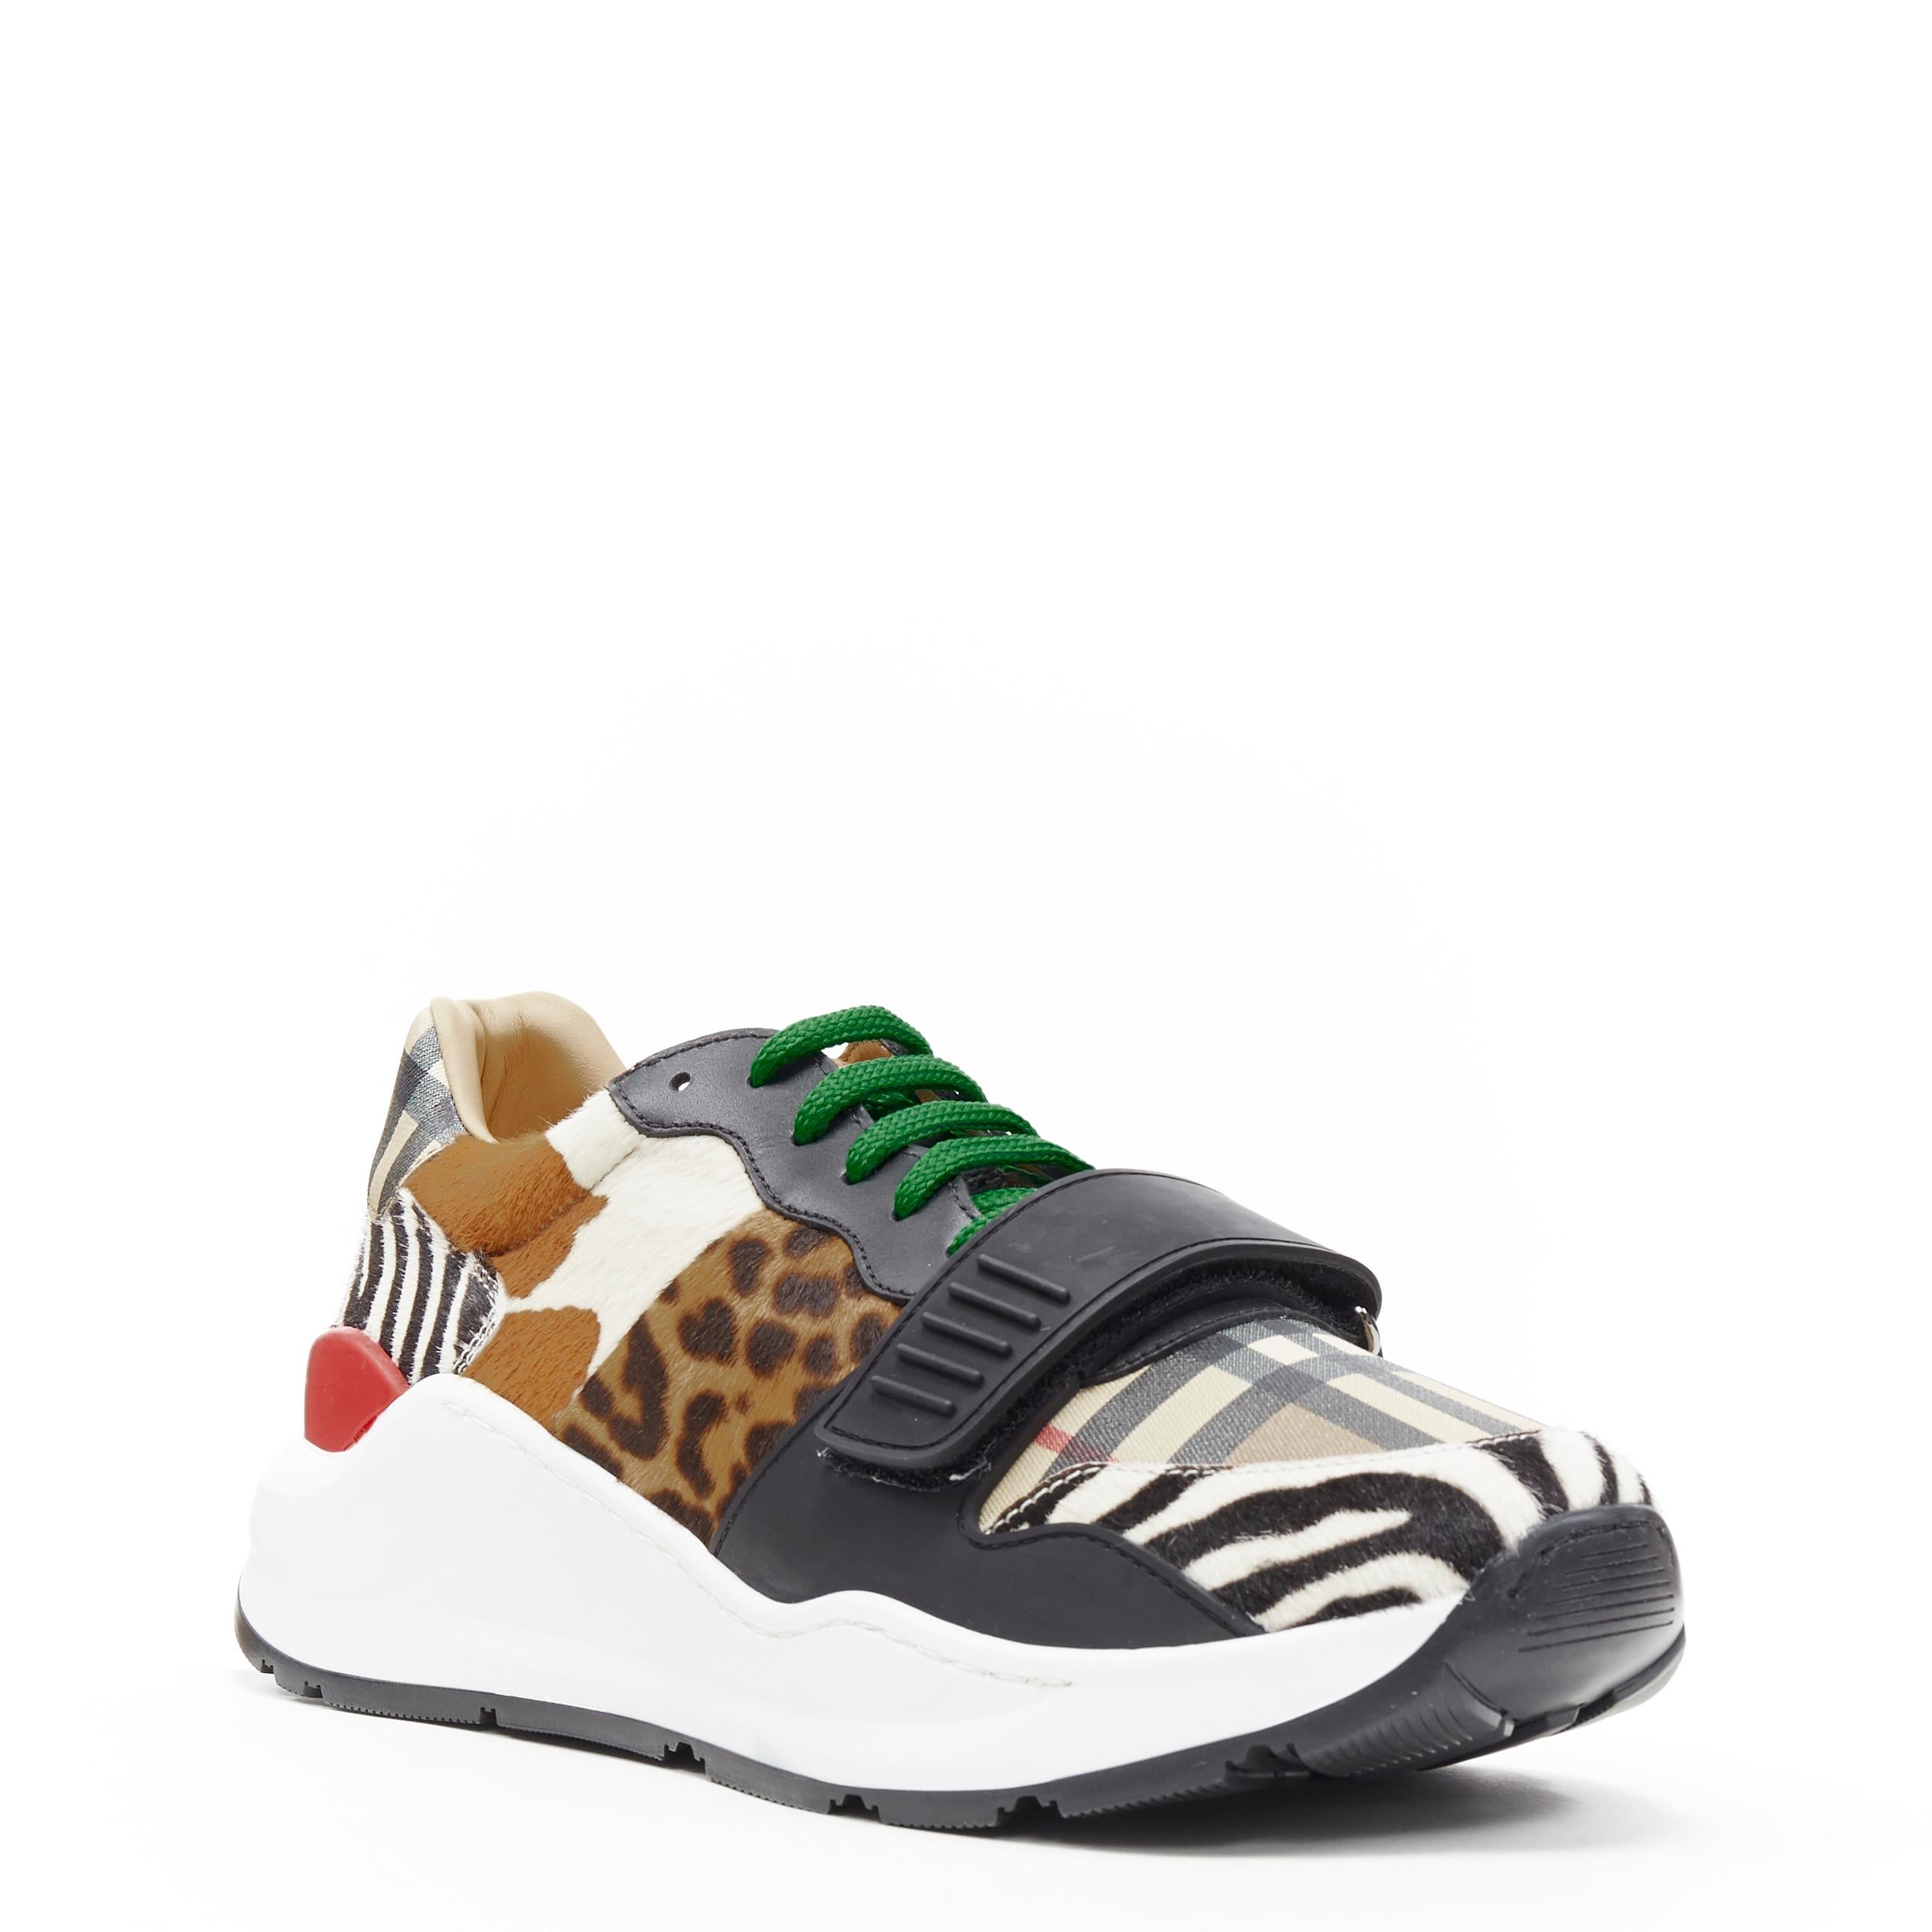 new BURBERRY TISCI Ramsey Mixed Wild Animal print low top chunky sneakers EU41
Brand: Burberry
Designer: Riccardo Tisci
Collection: 2019
Model Name / Style: Ramsey
Material: Leather
Color: Multicolour
Pattern: Animal Print
Closure: Lace up
Lining